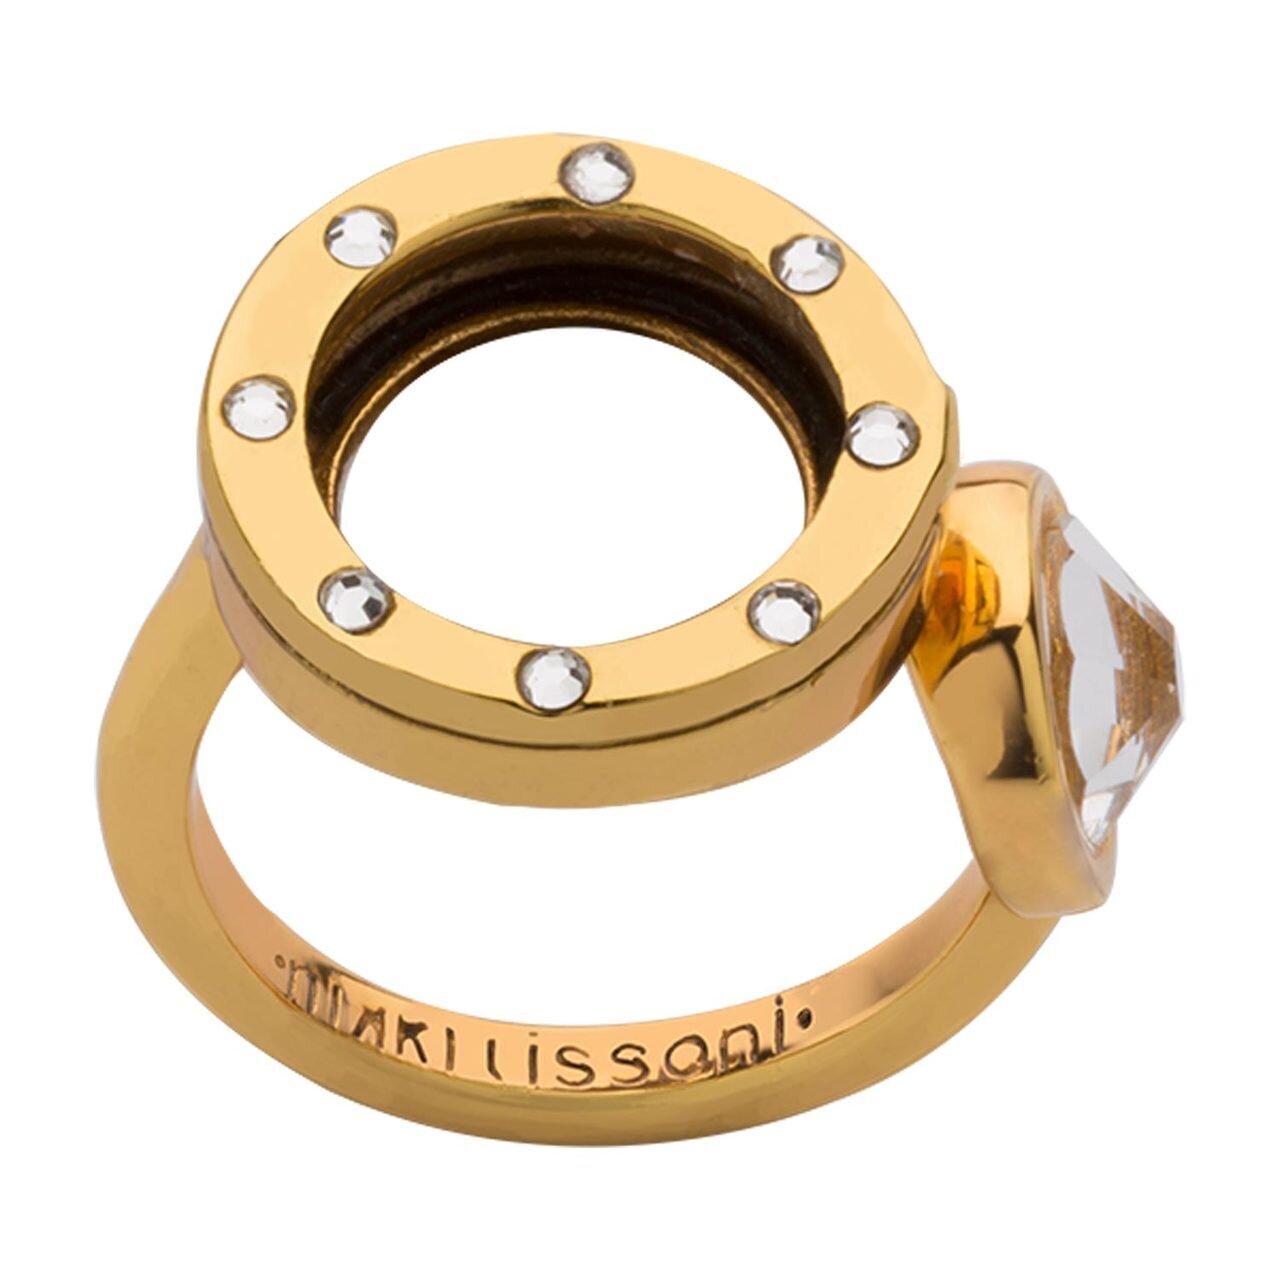 Nikki Lissoni Interchangeable Open Ring with Swarovski Stones Gold-plated Size 7 R1006G7